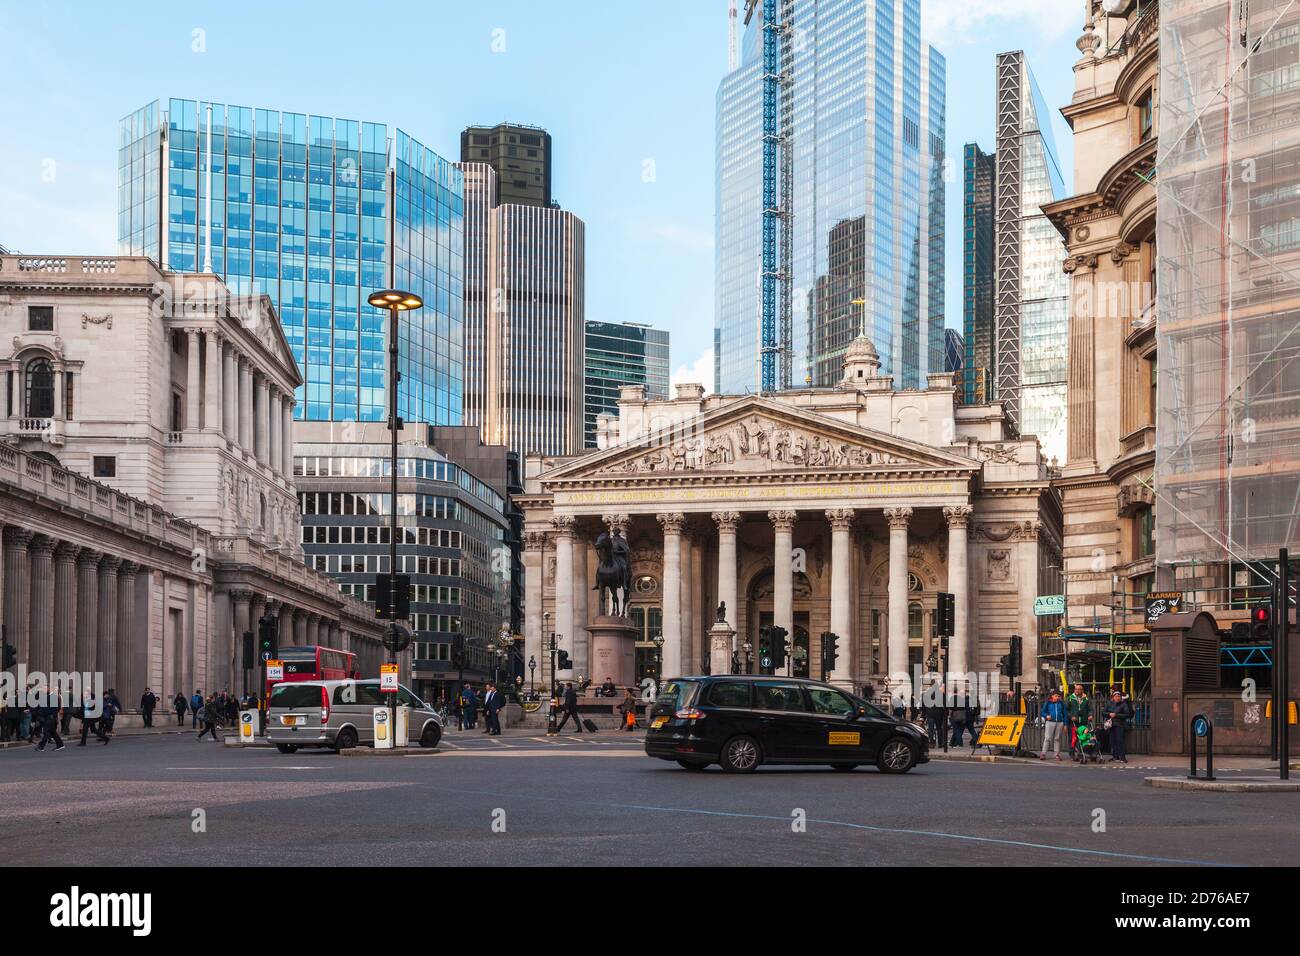 London, United Kingdom - April 25, 2019: Bank Underground Station Princes Street, London street view Equestrian Statue of the Duke of Wellington and o Stock Photo